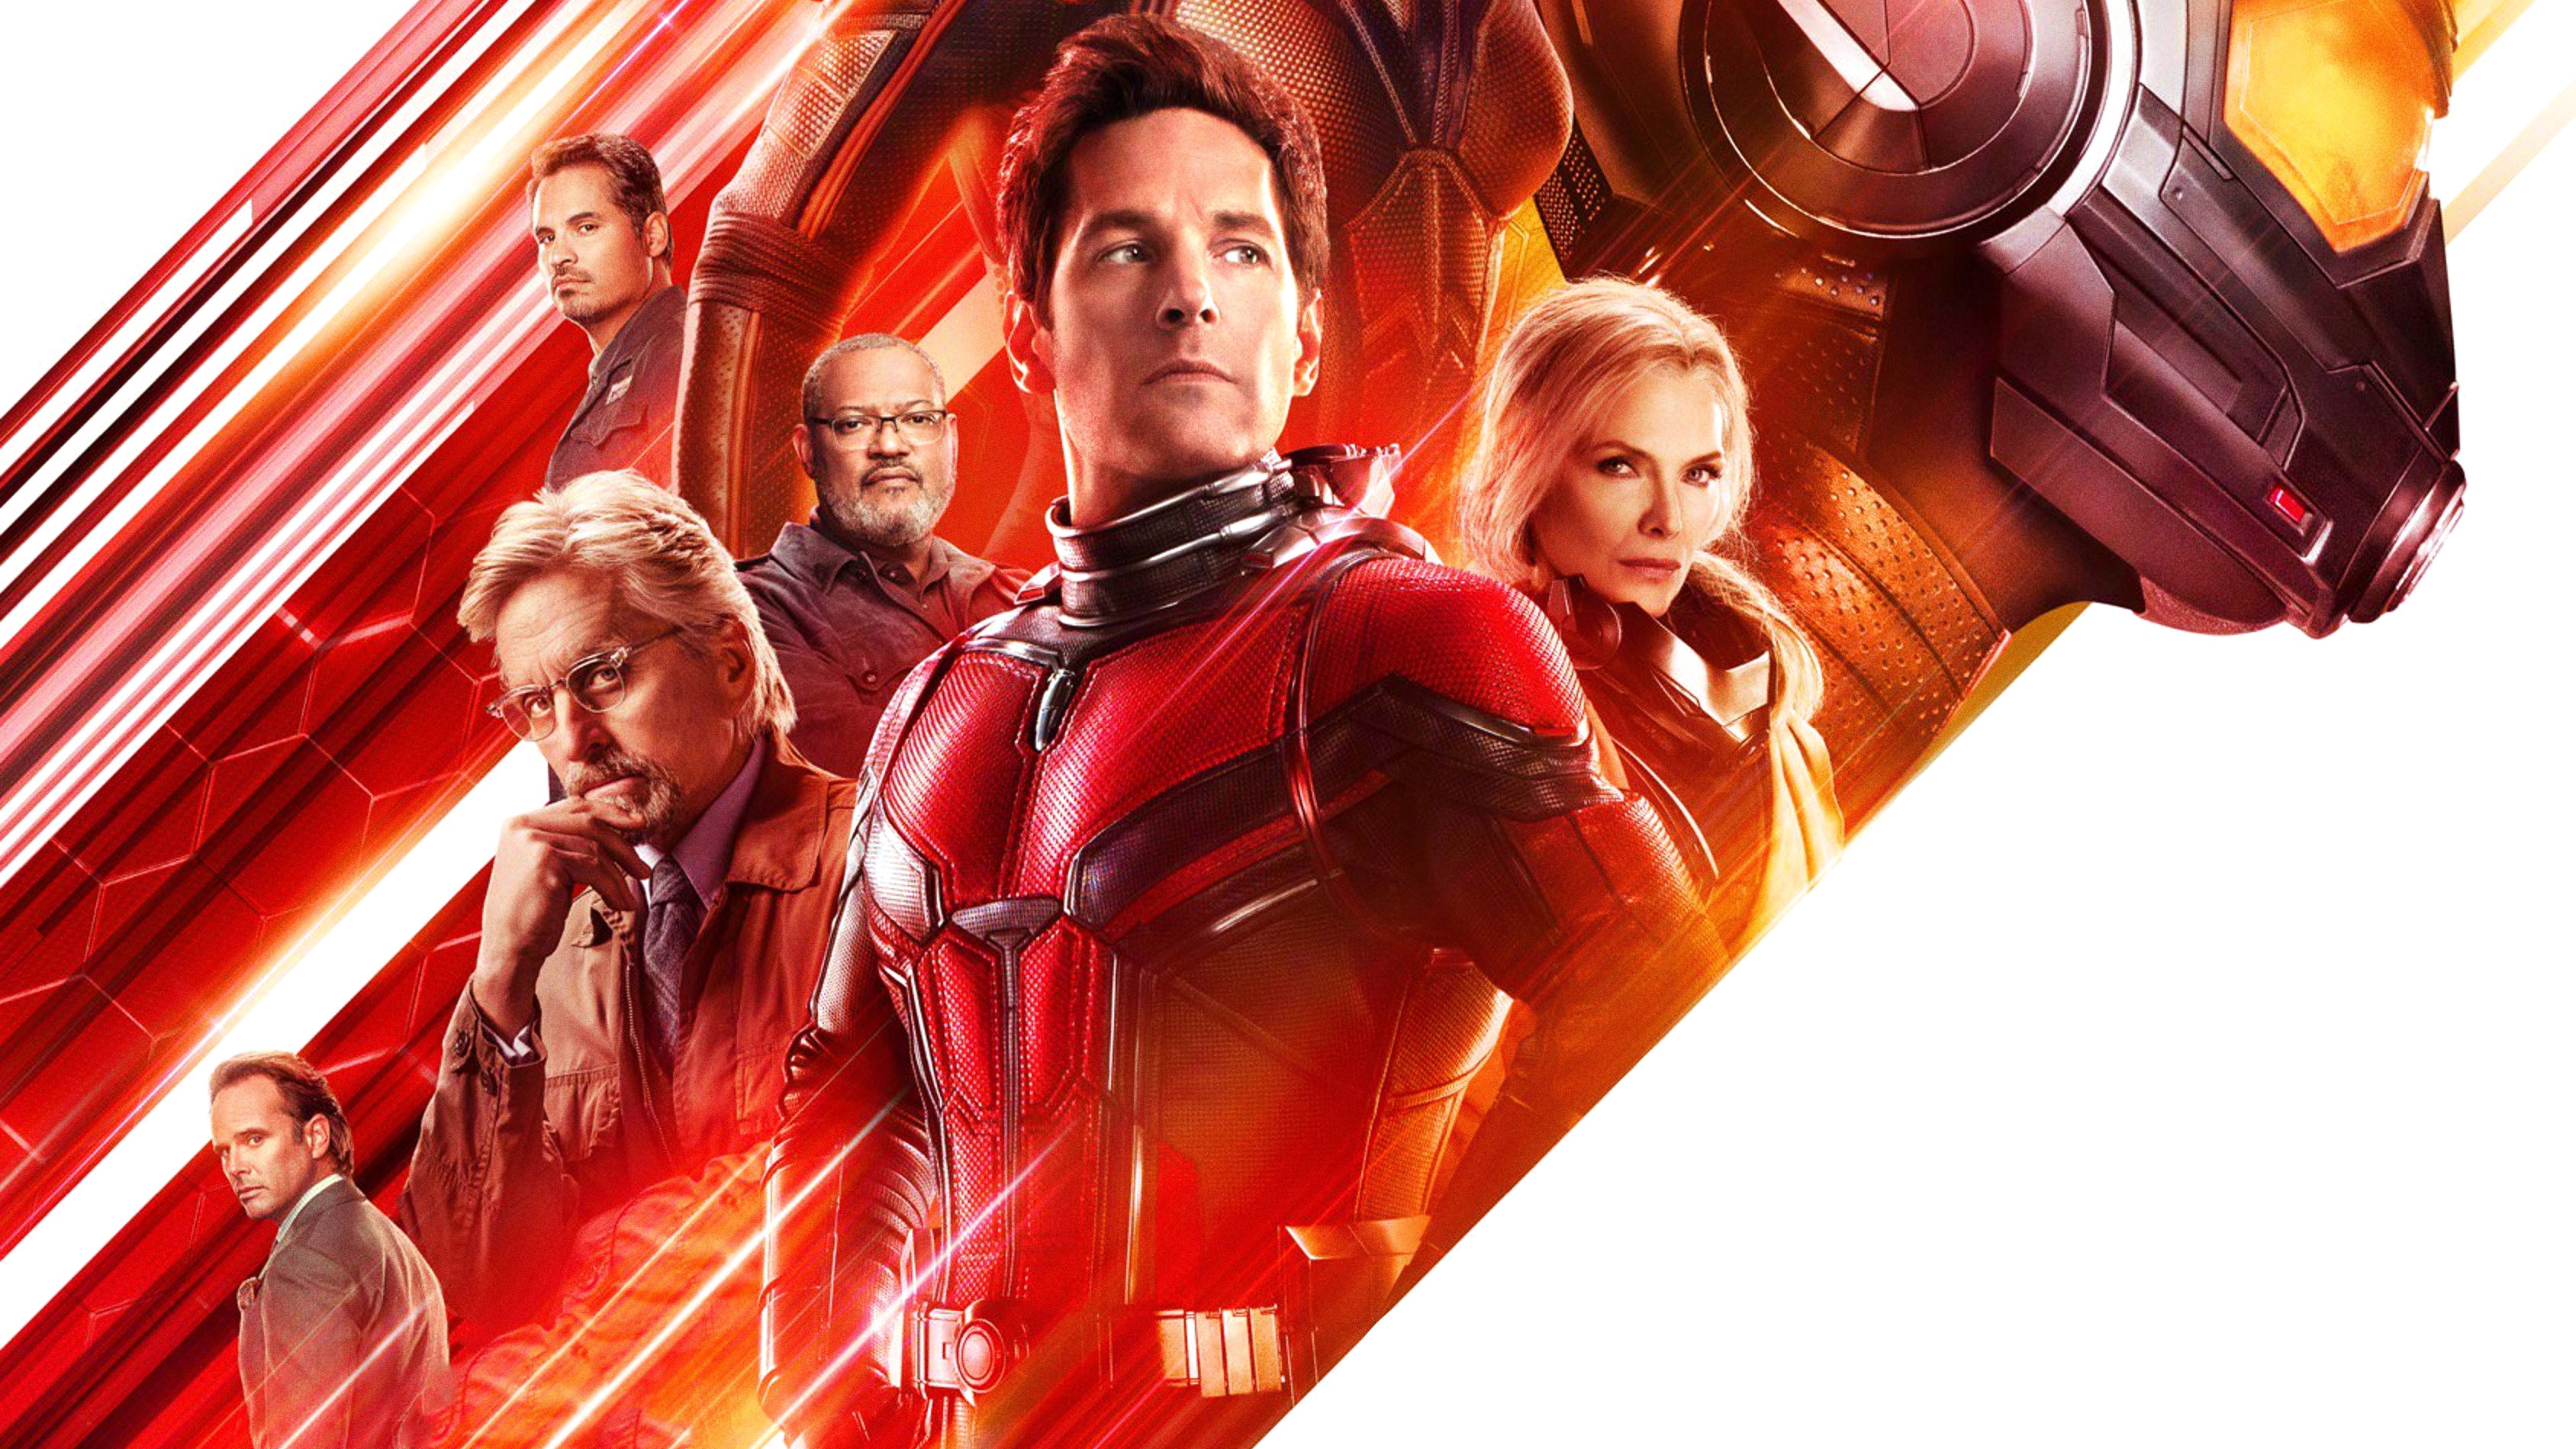 Ant-Man and The Wasp HD wallpaper, Marvel action, Dynamic duo, Superhero adventure, 3380x1900 HD Desktop